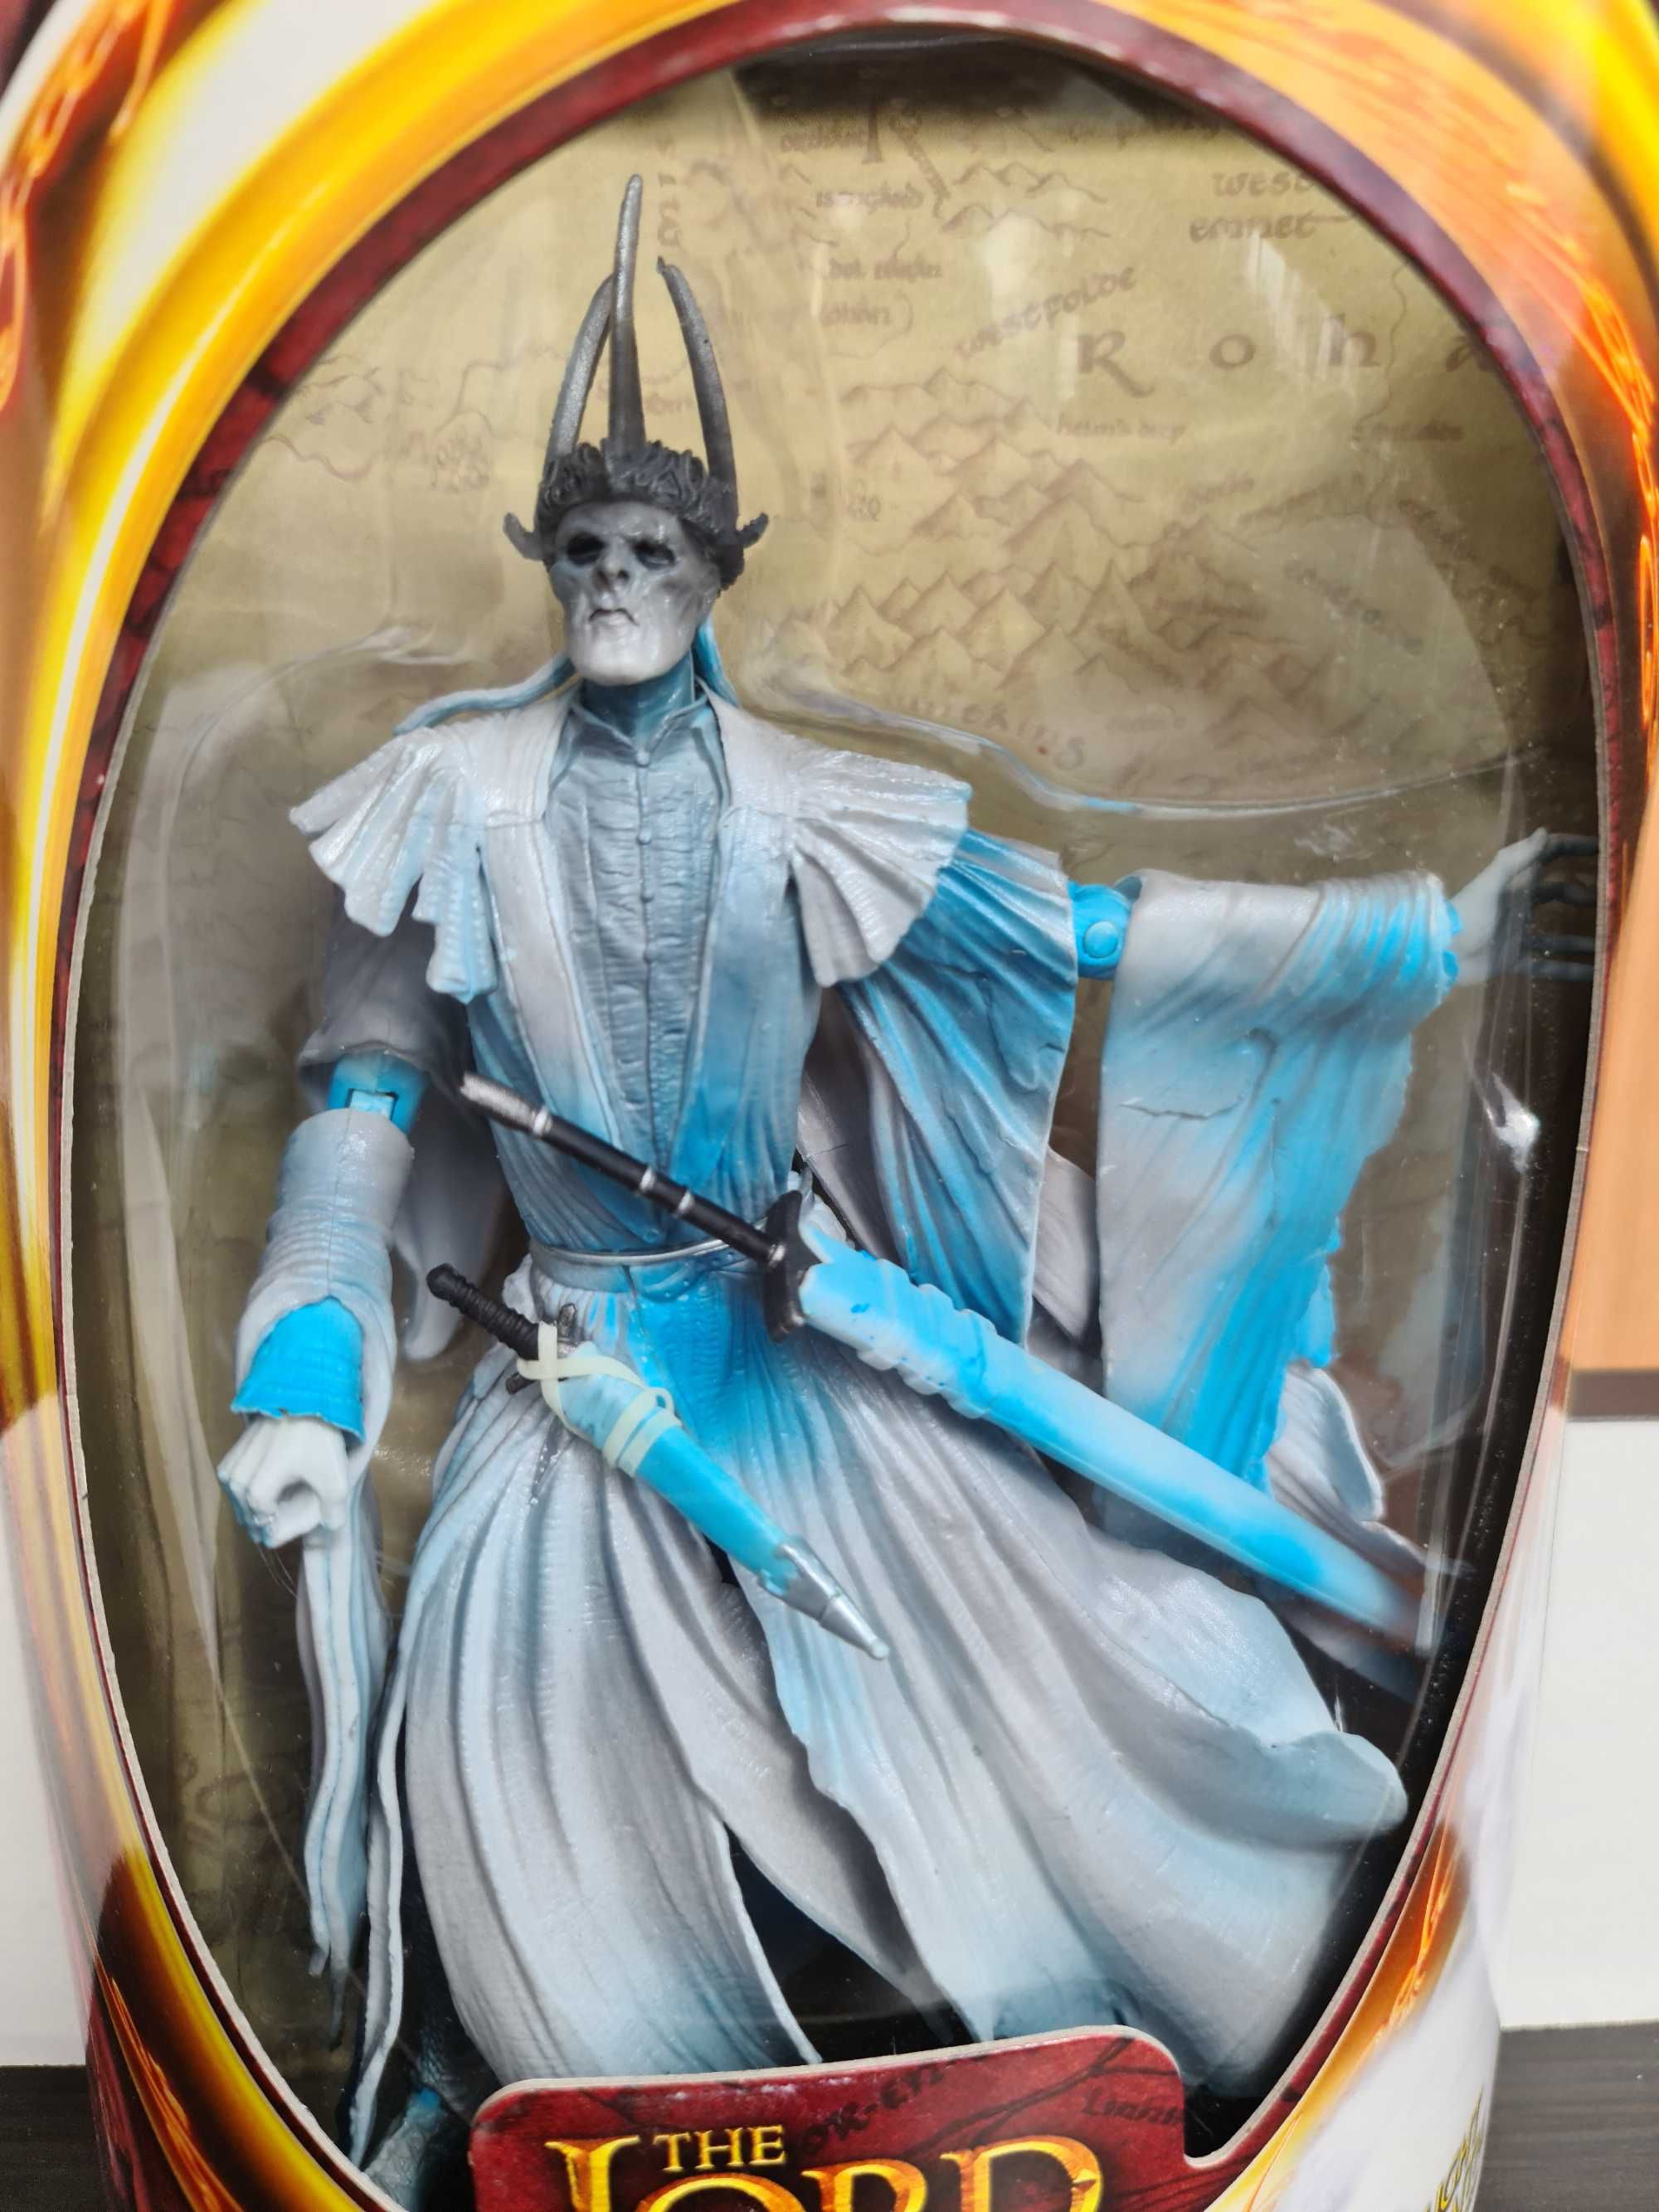 Figurina Lord Of The Rings Witch-king of Angmar